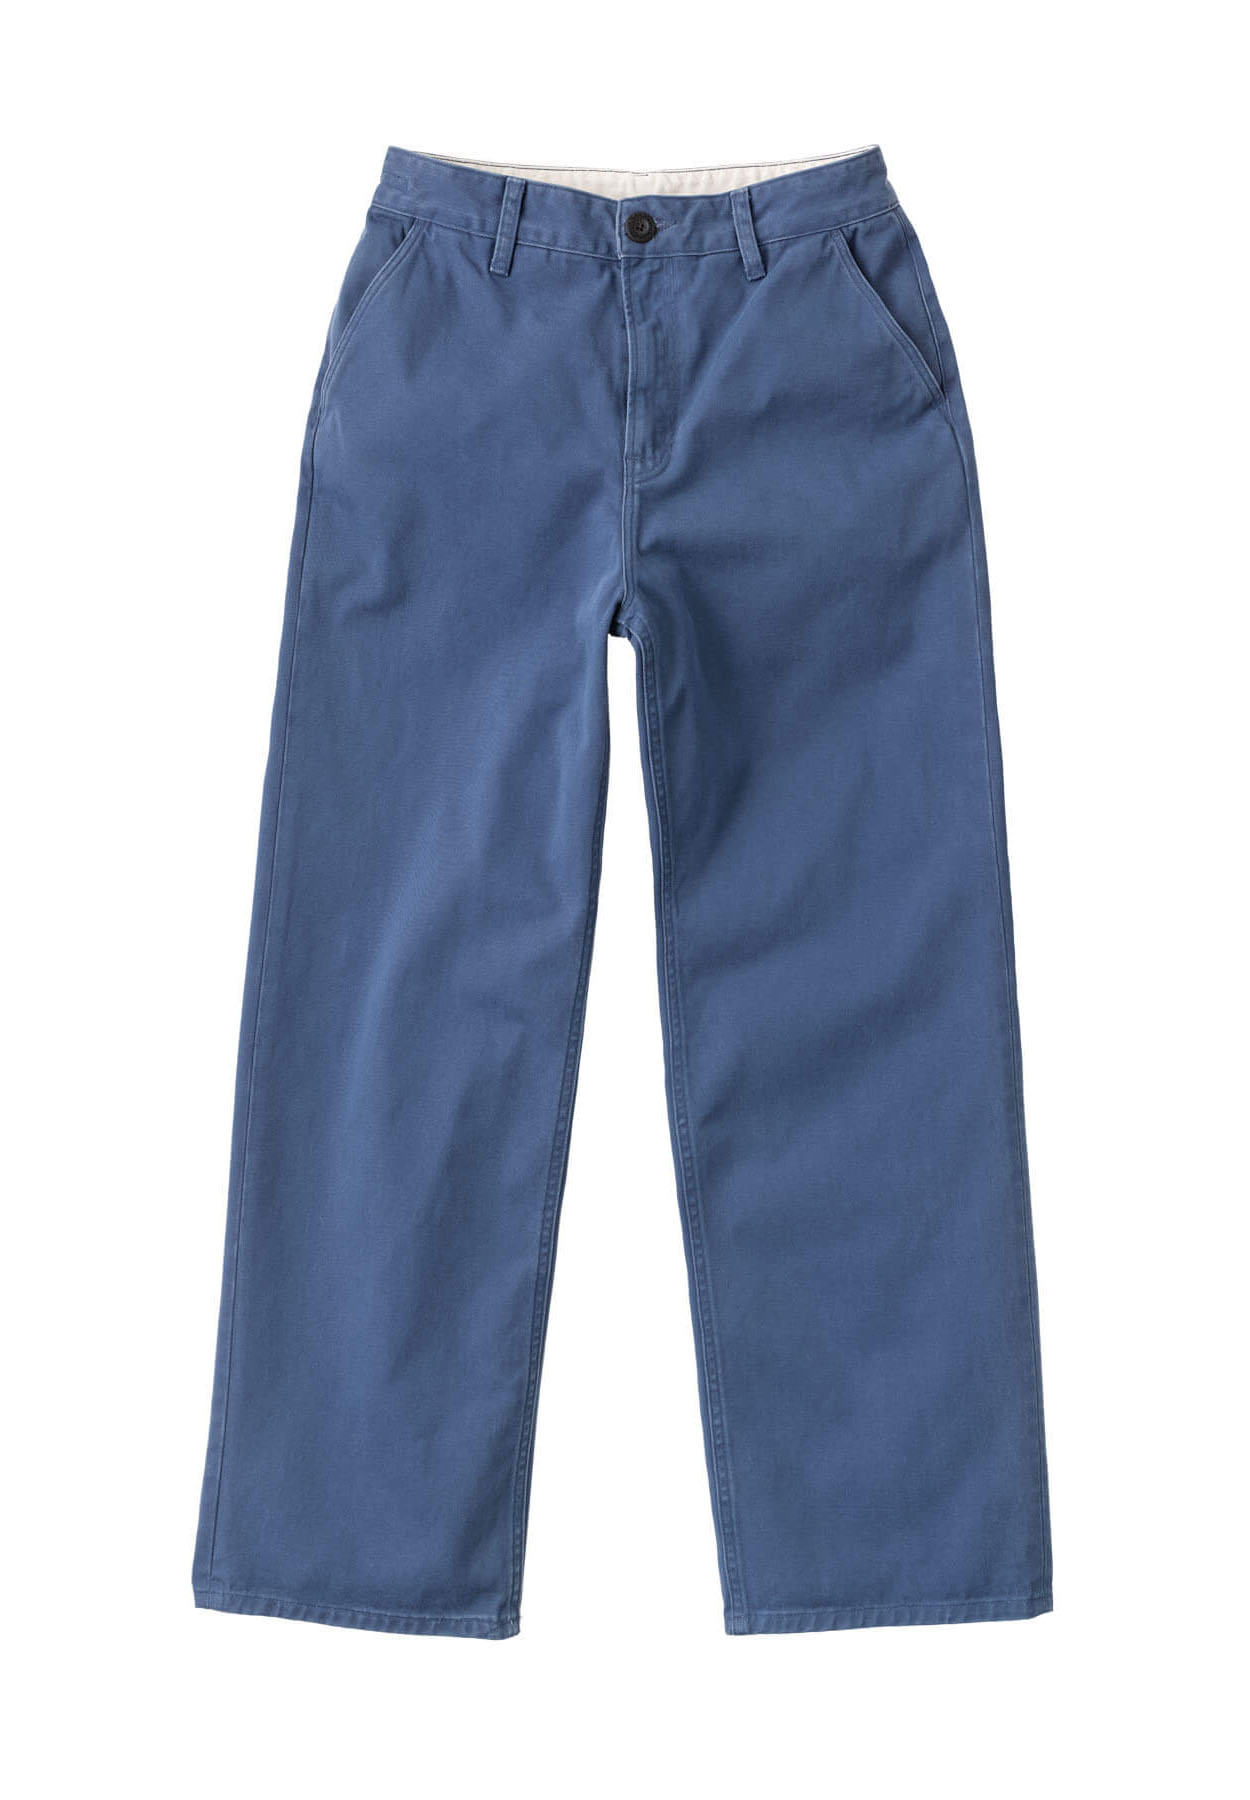 NUDIE JEANS Willa Pants Twill blue S